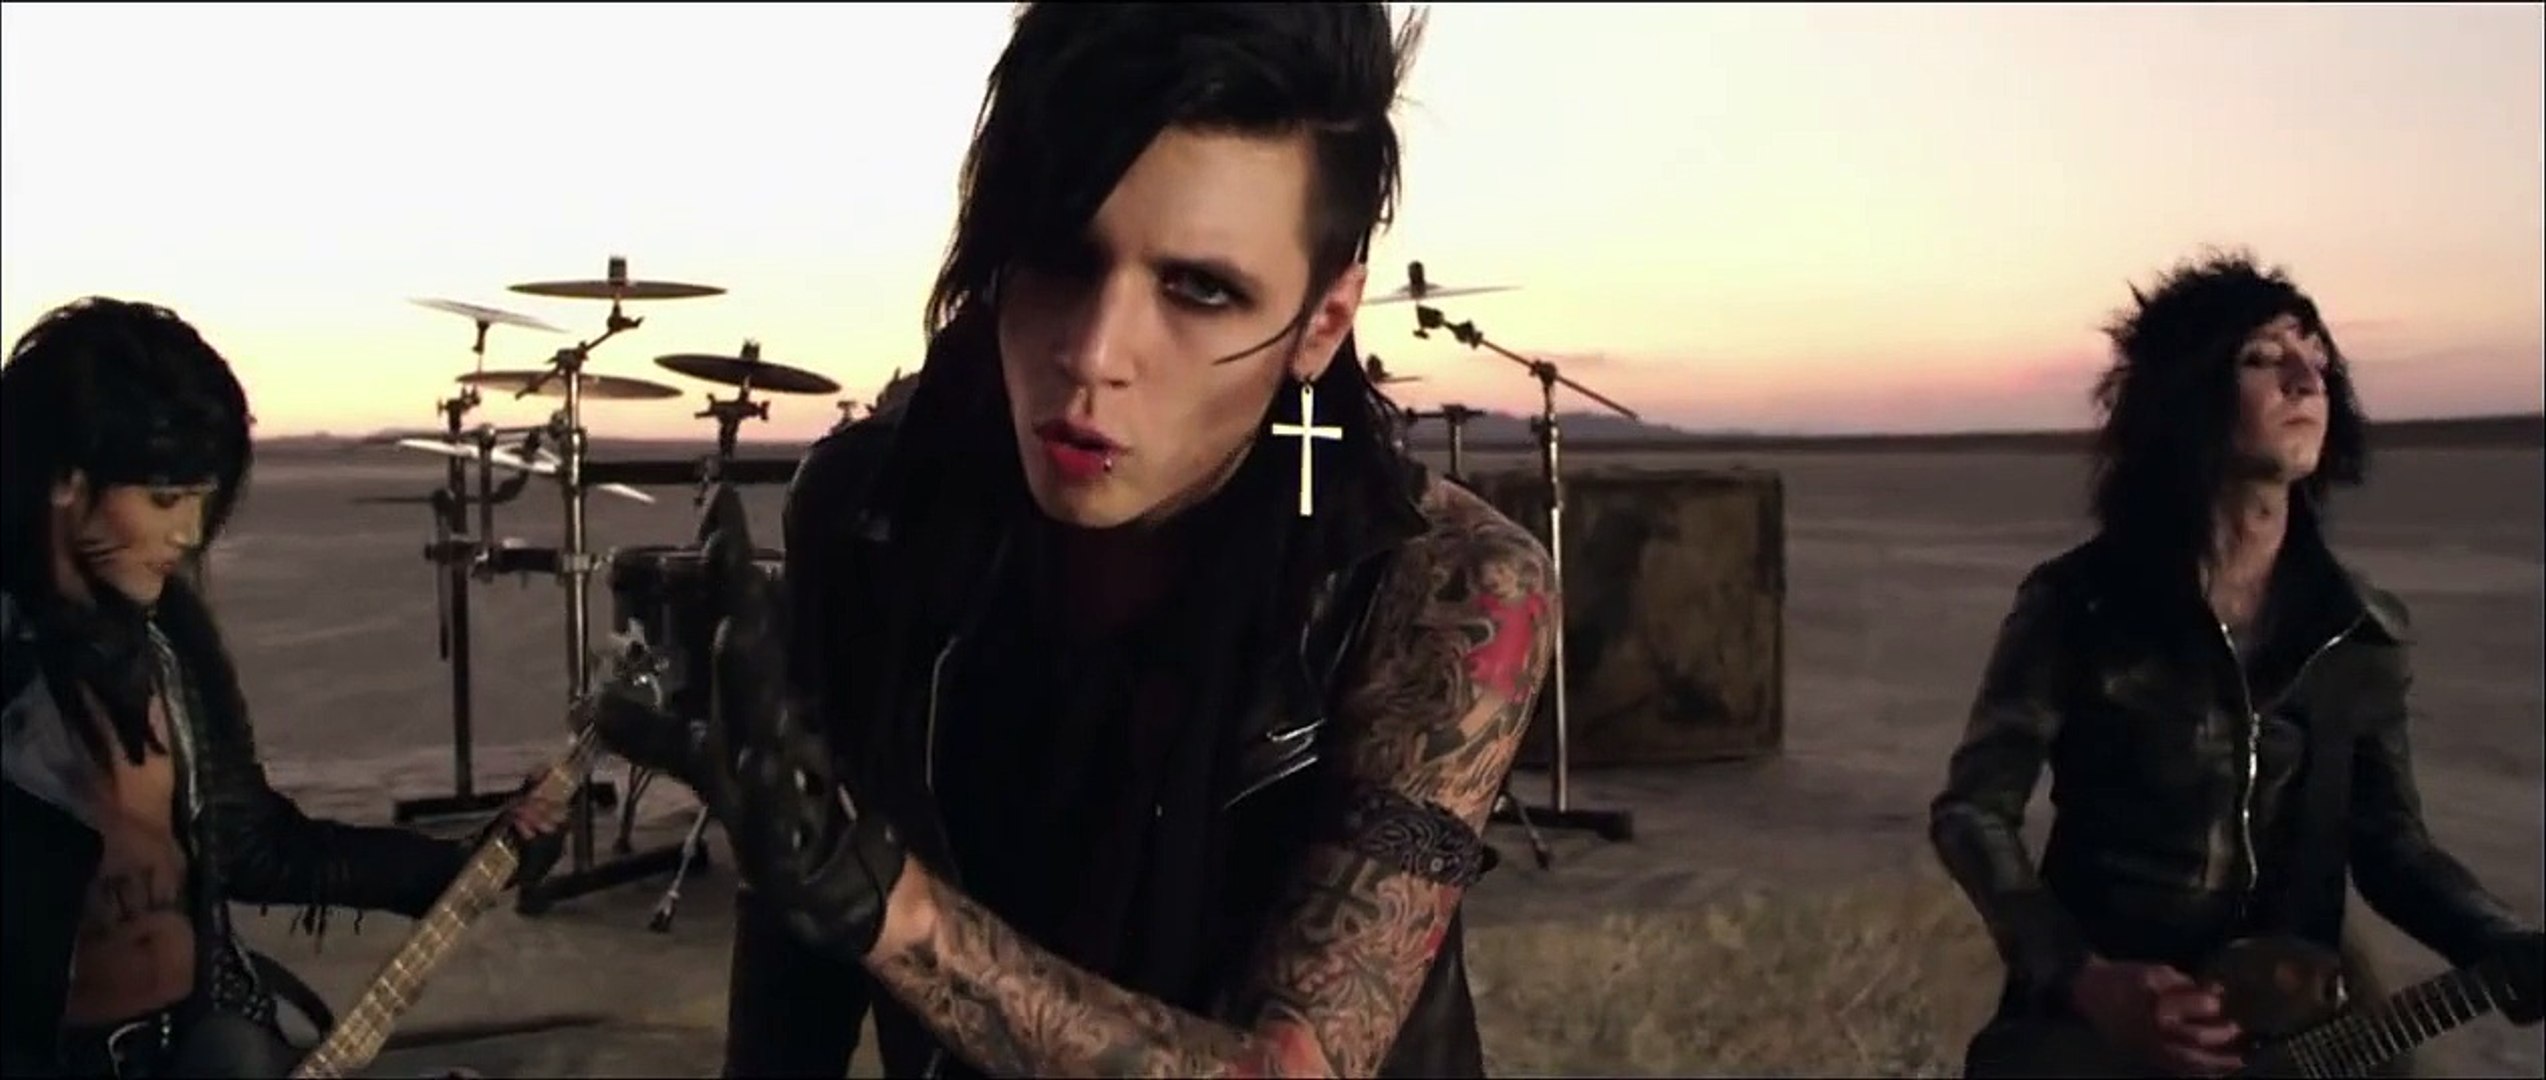 Black Veil Brides In The End Video Dailymotion.